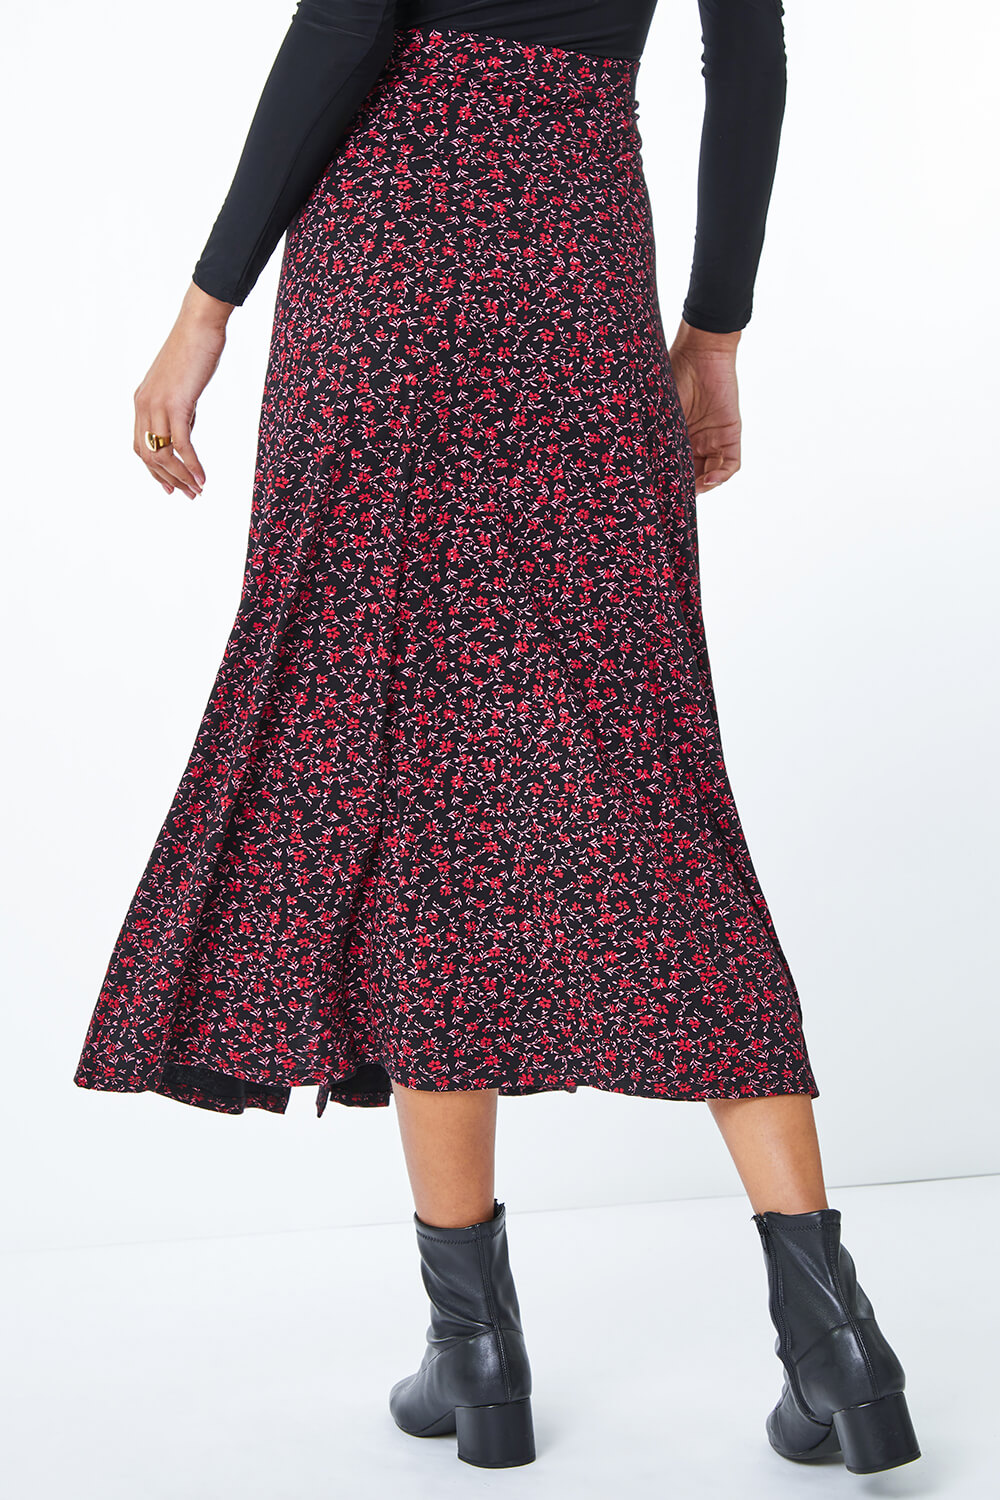 Red Ditsy Floral Print Midi Skirt , Image 2 of 5